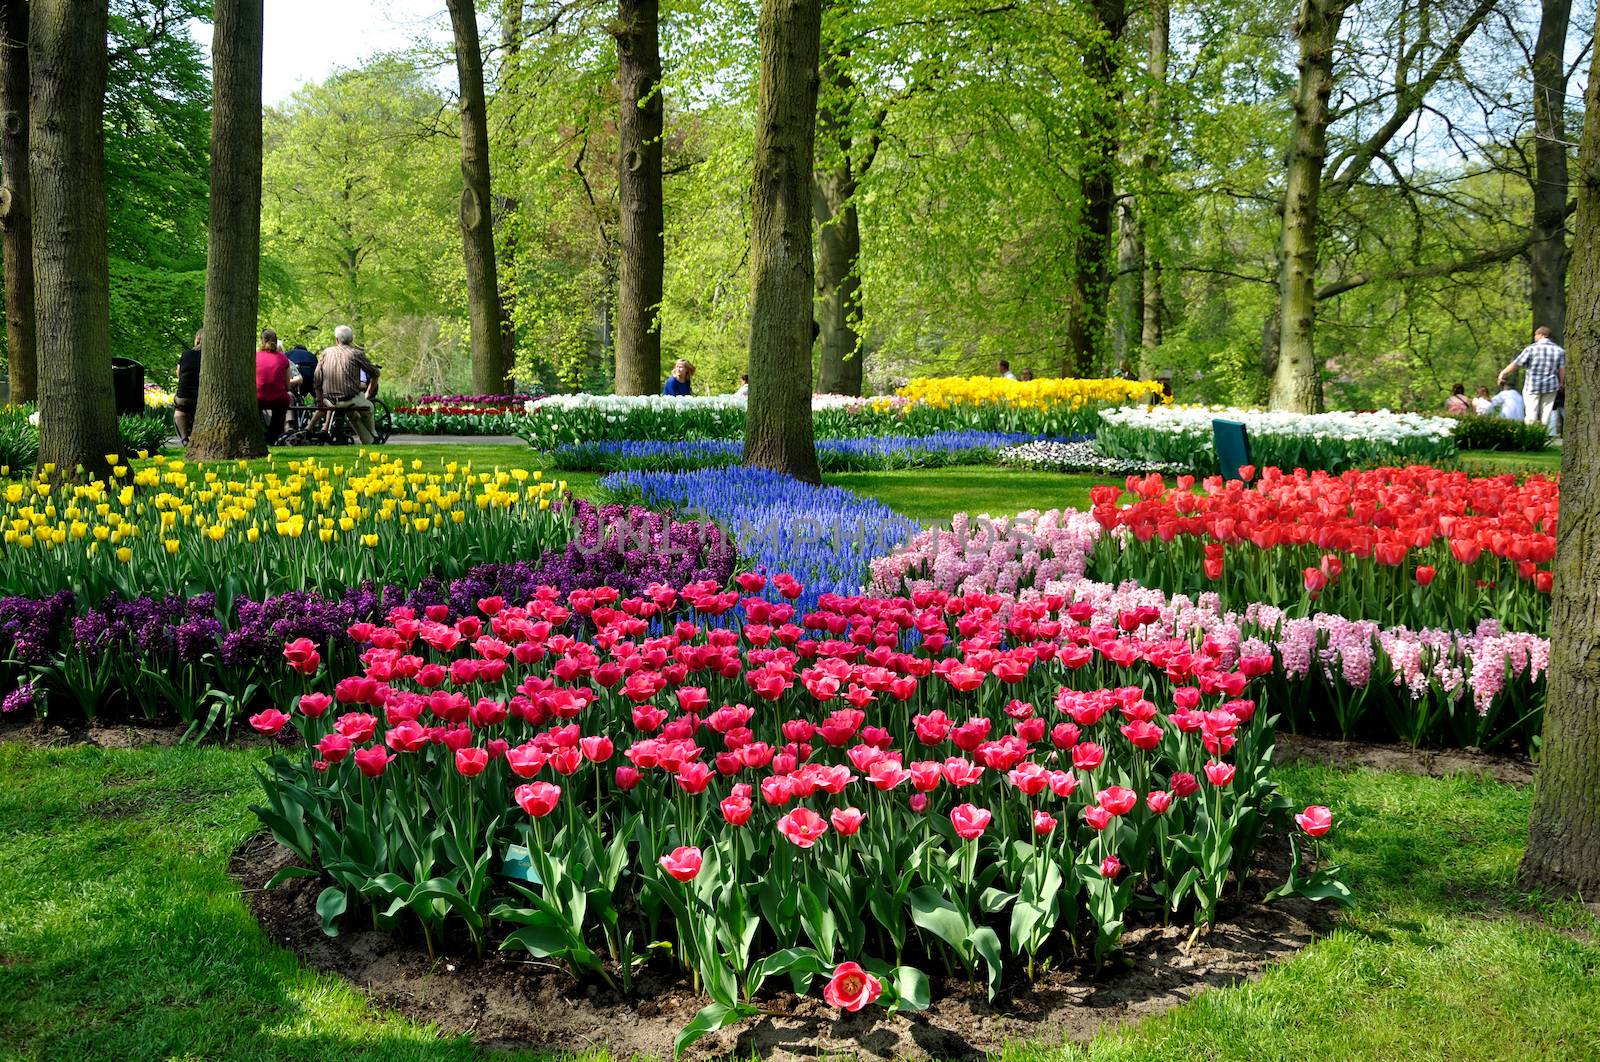 Purple, yellow, blue, pink and white tulips in Keukenhof park in by Eagle2308